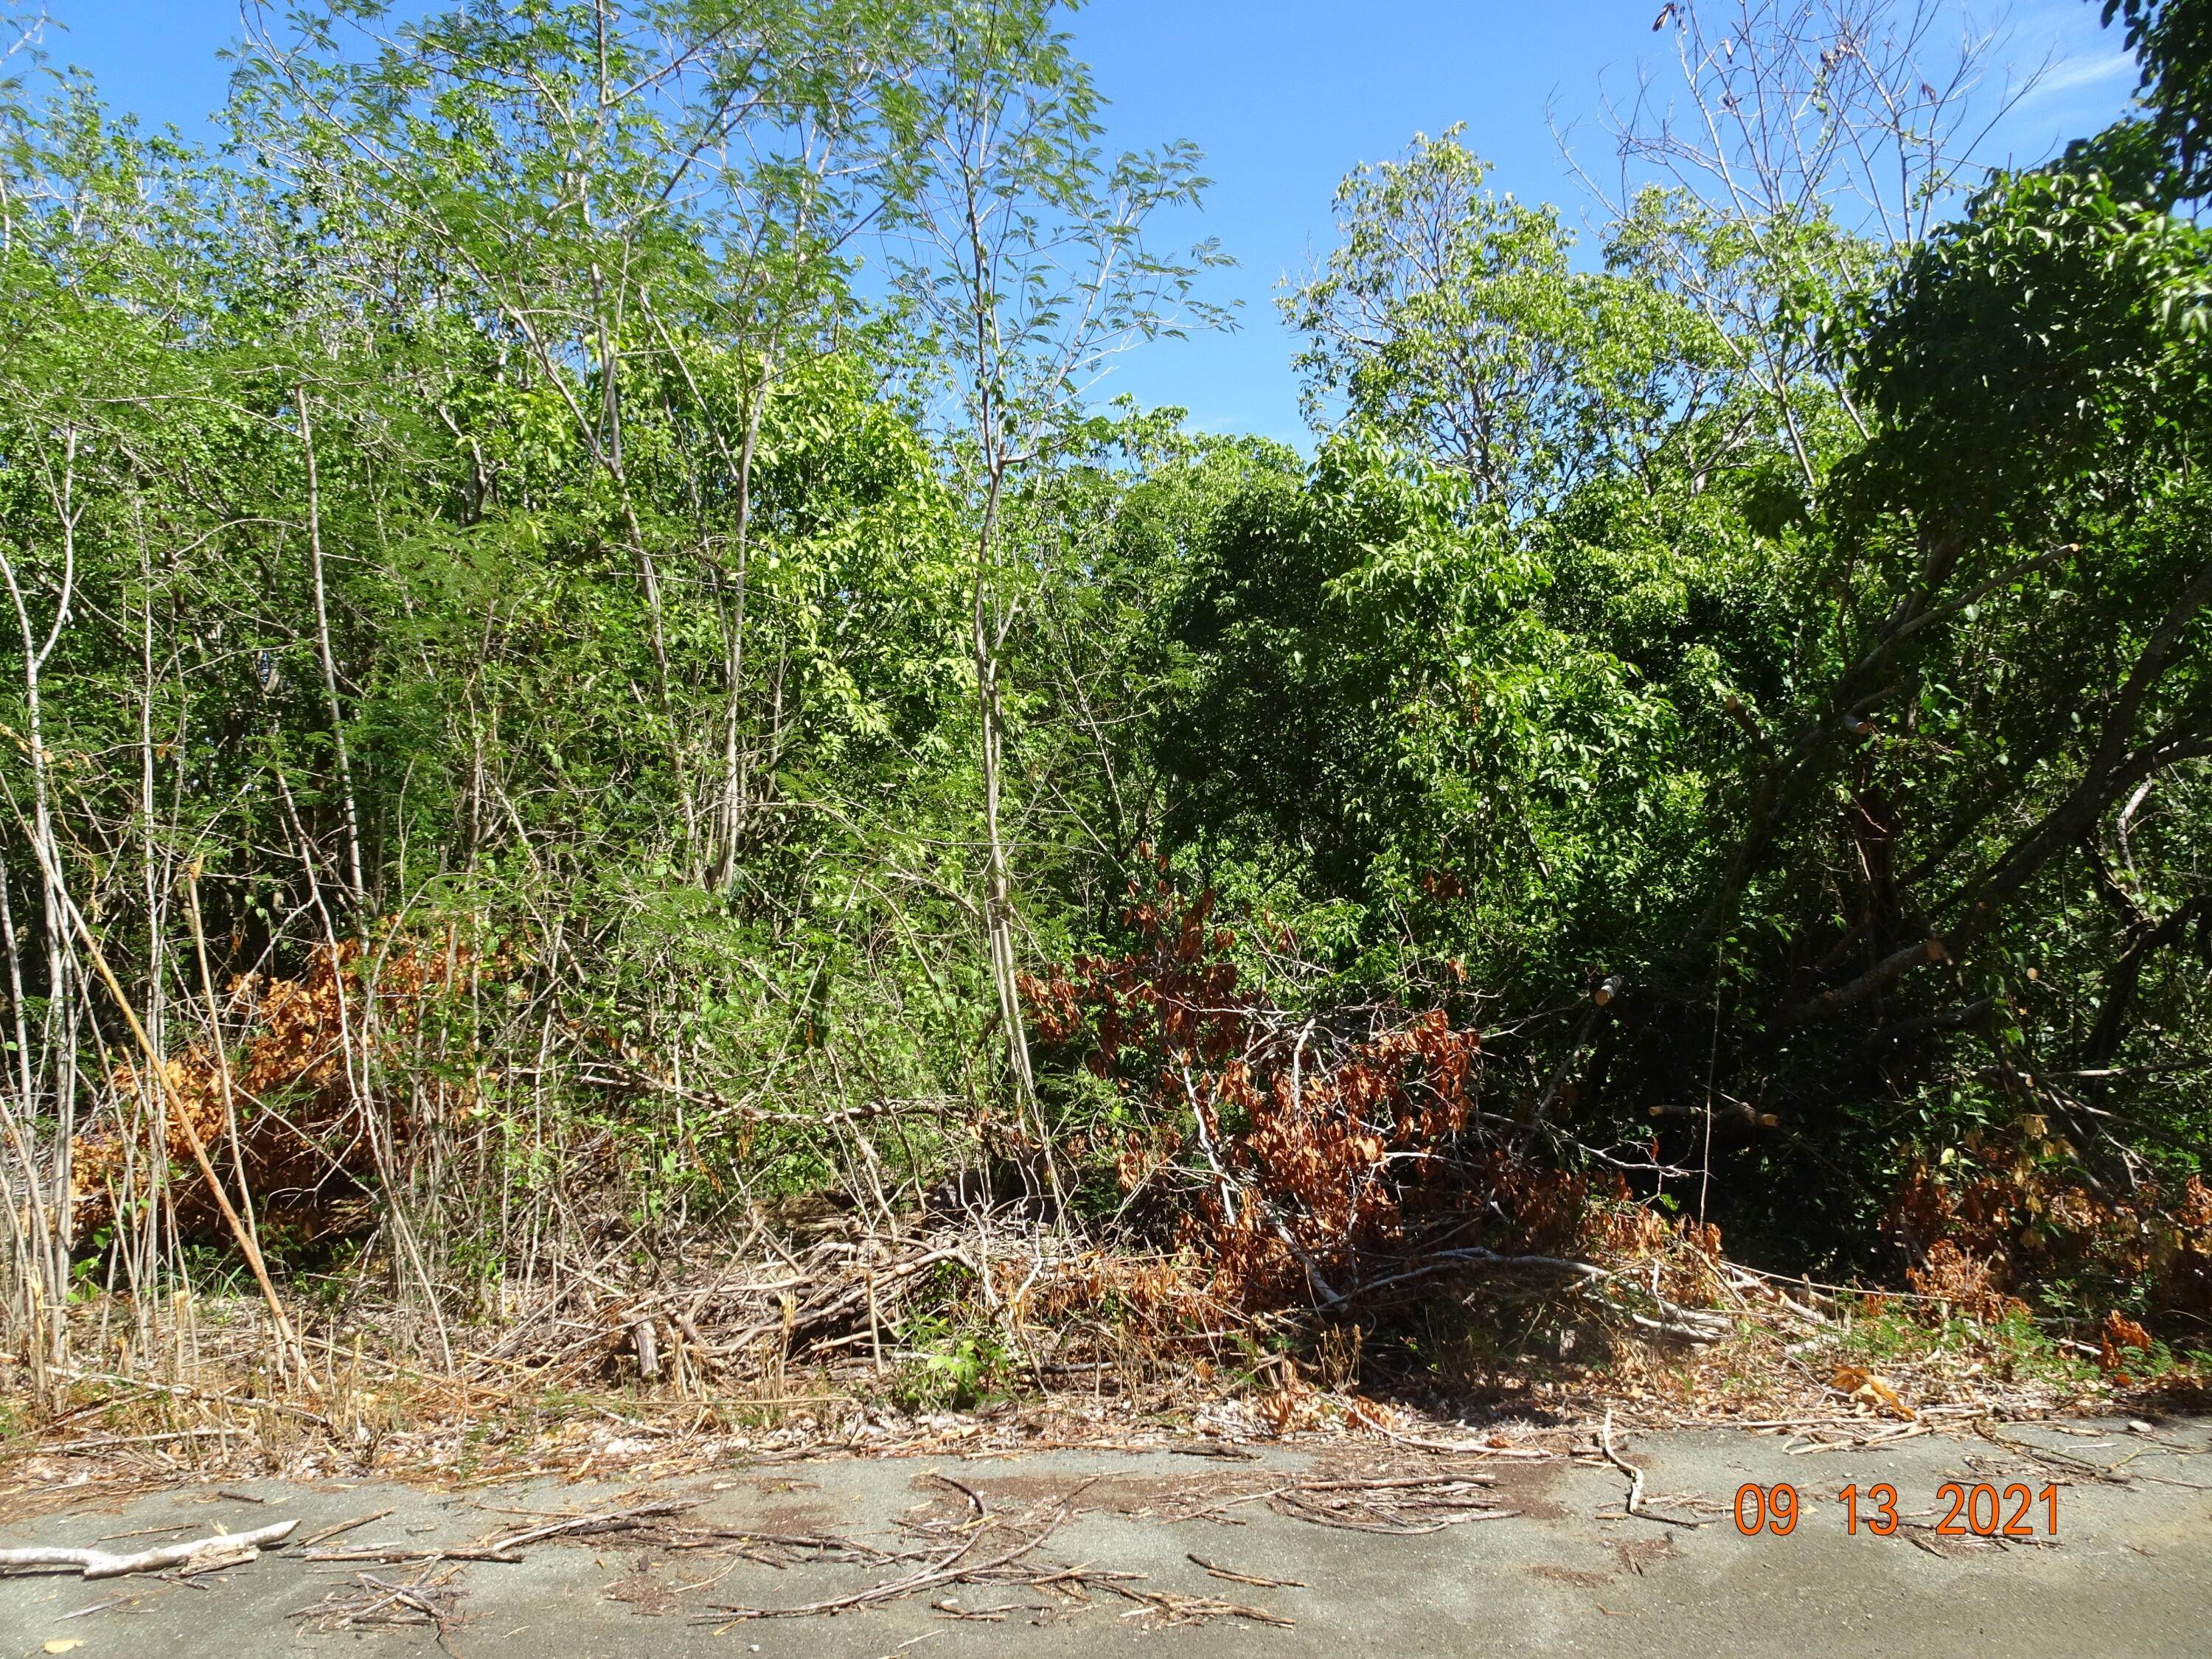 7. Land for Sale at 37 Pleasant Valley EB St Croix, Virgin Islands 00820 United States Virgin Islands